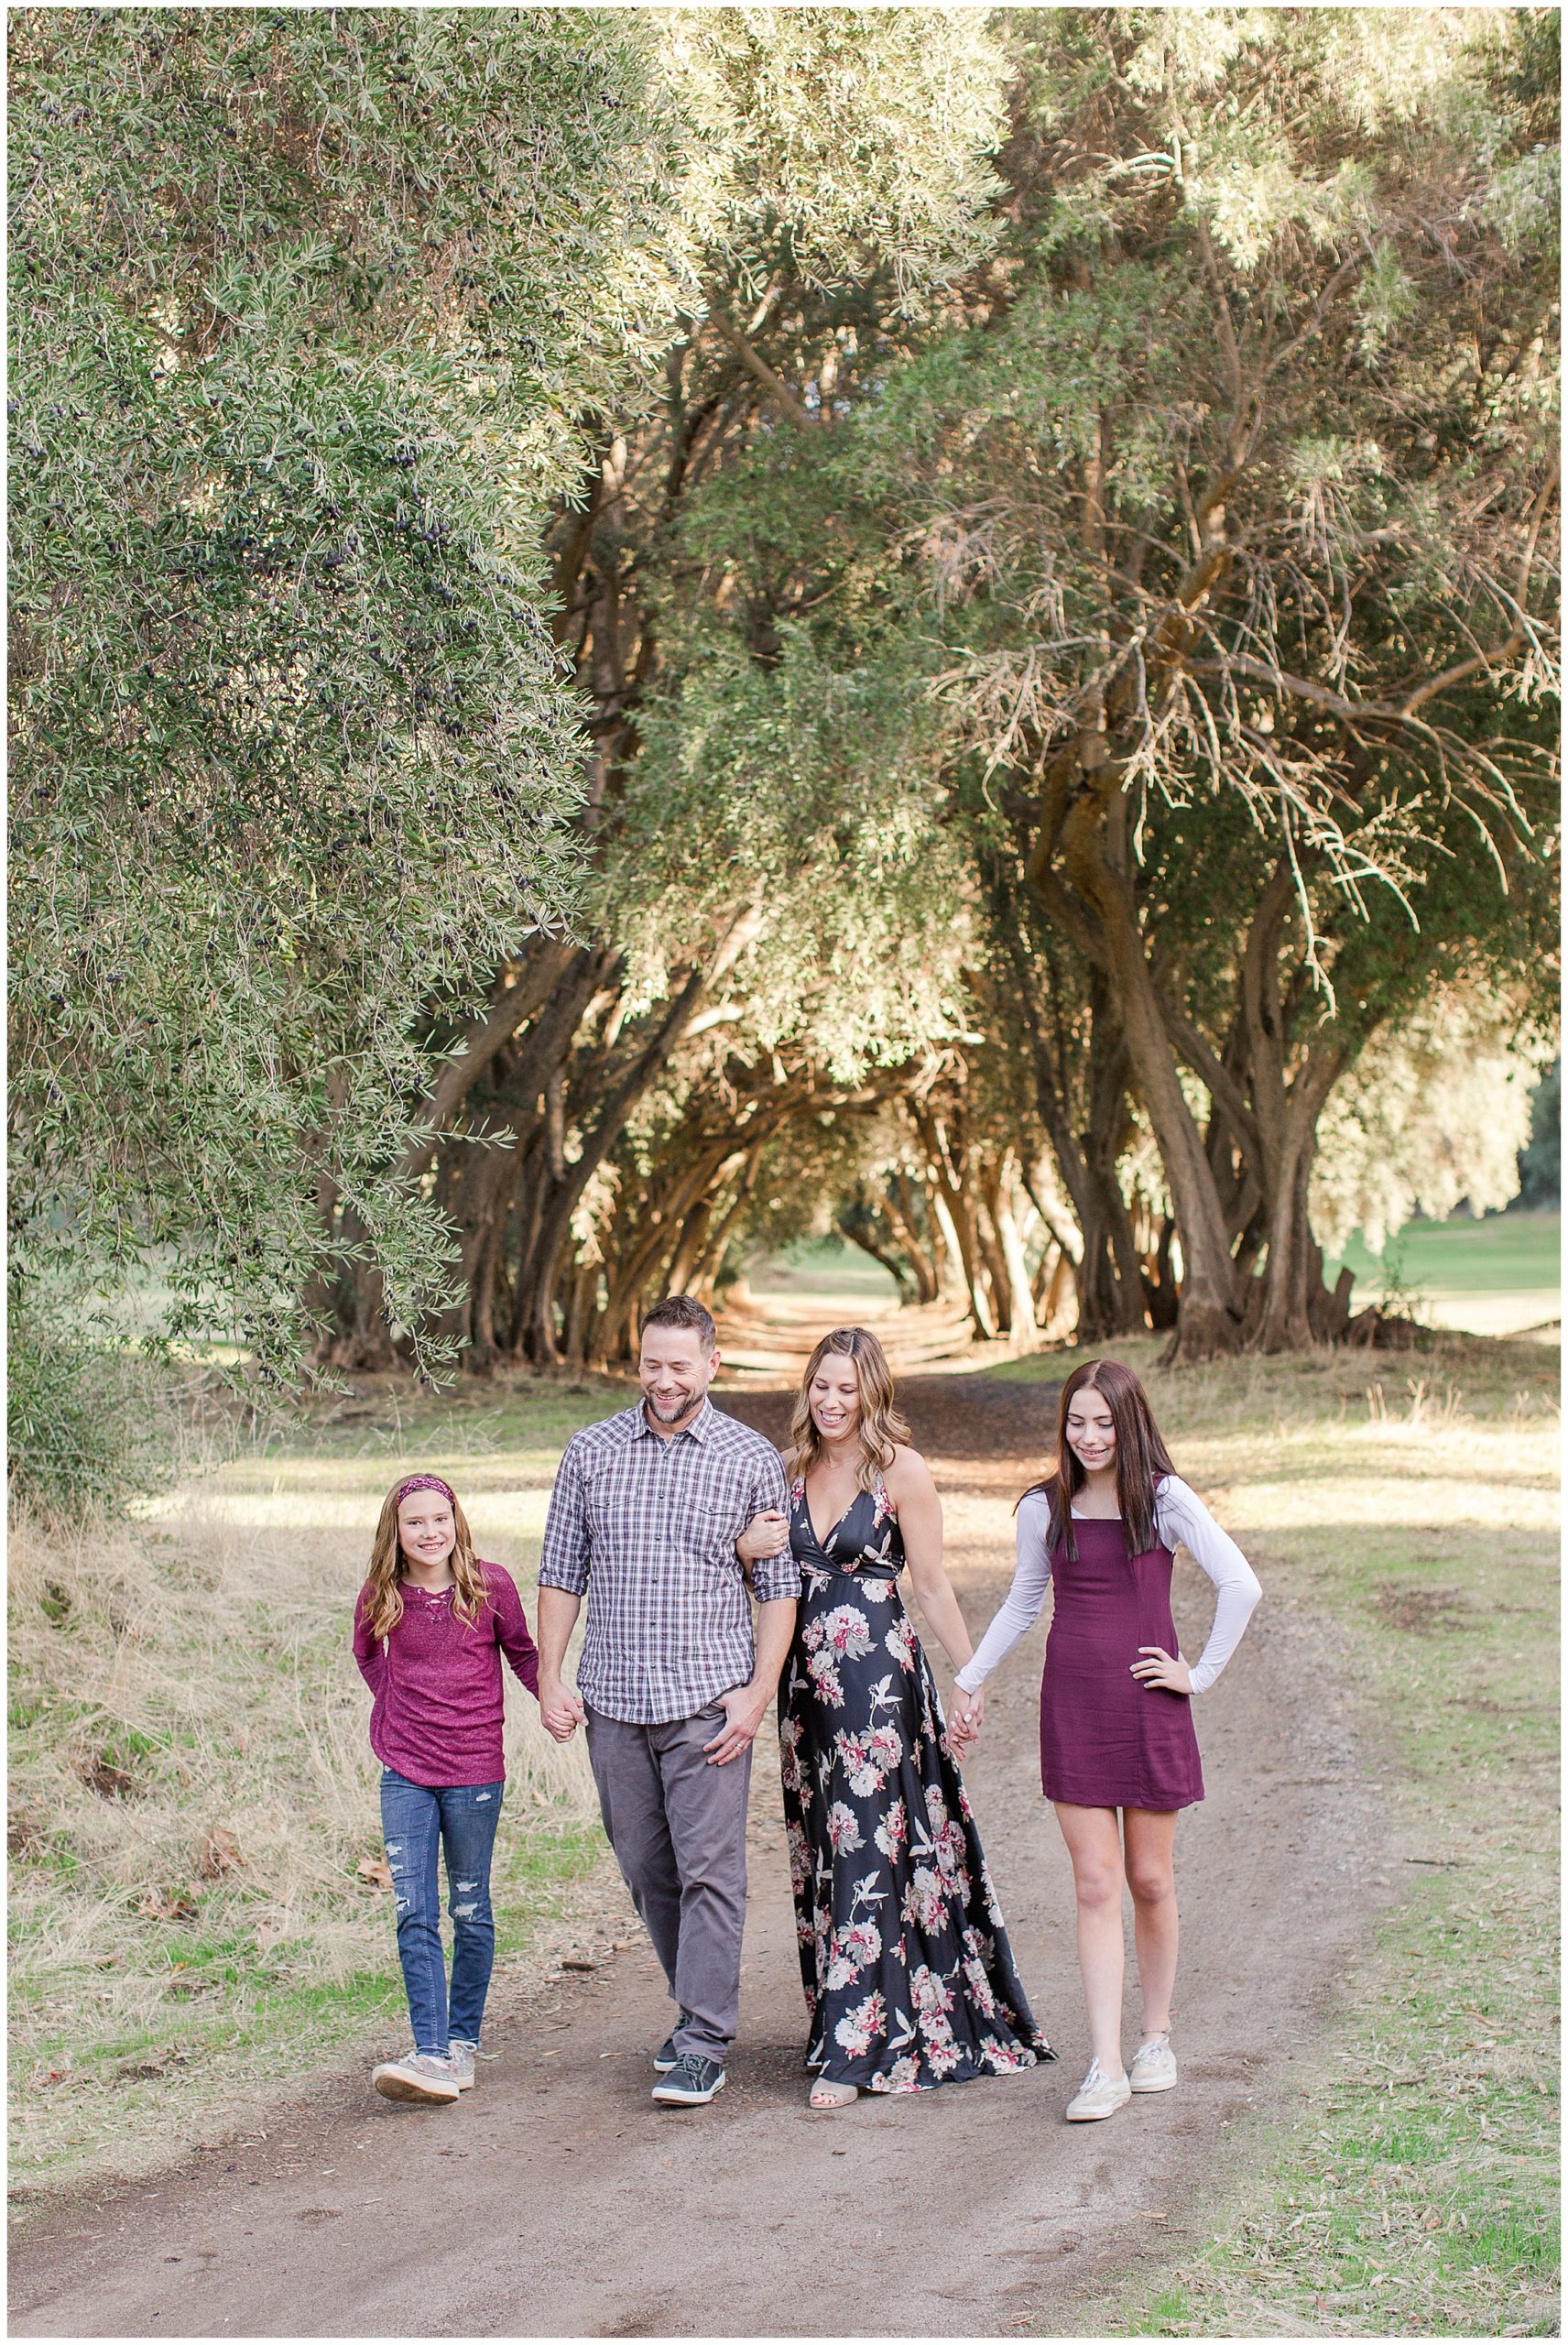 Fall Family Walking in Olive Grove | Kimberly + Jeff